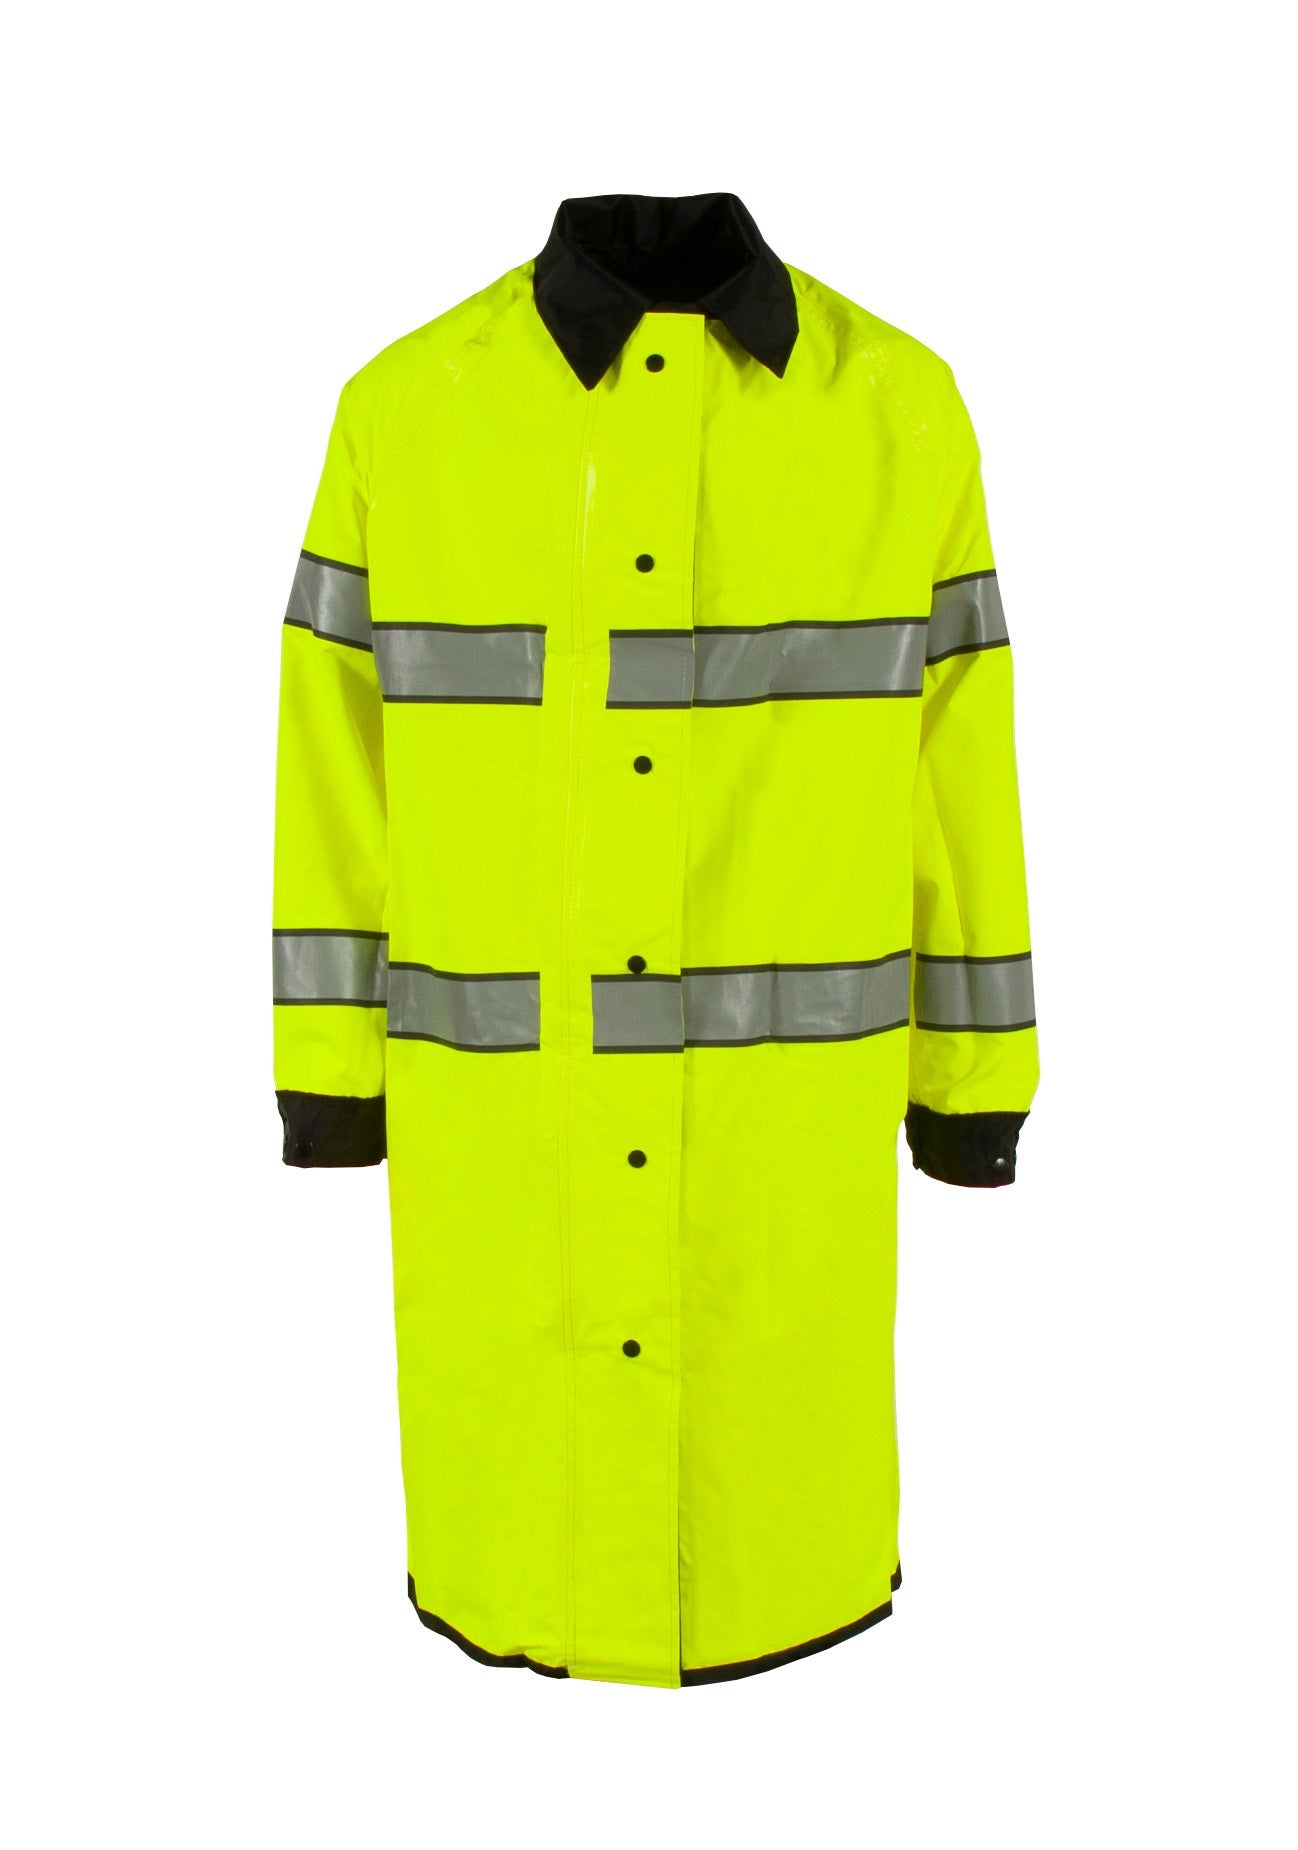 Neese 4703RCH3M Safe Officer Series Reversible Raincoat with Reflective Taping